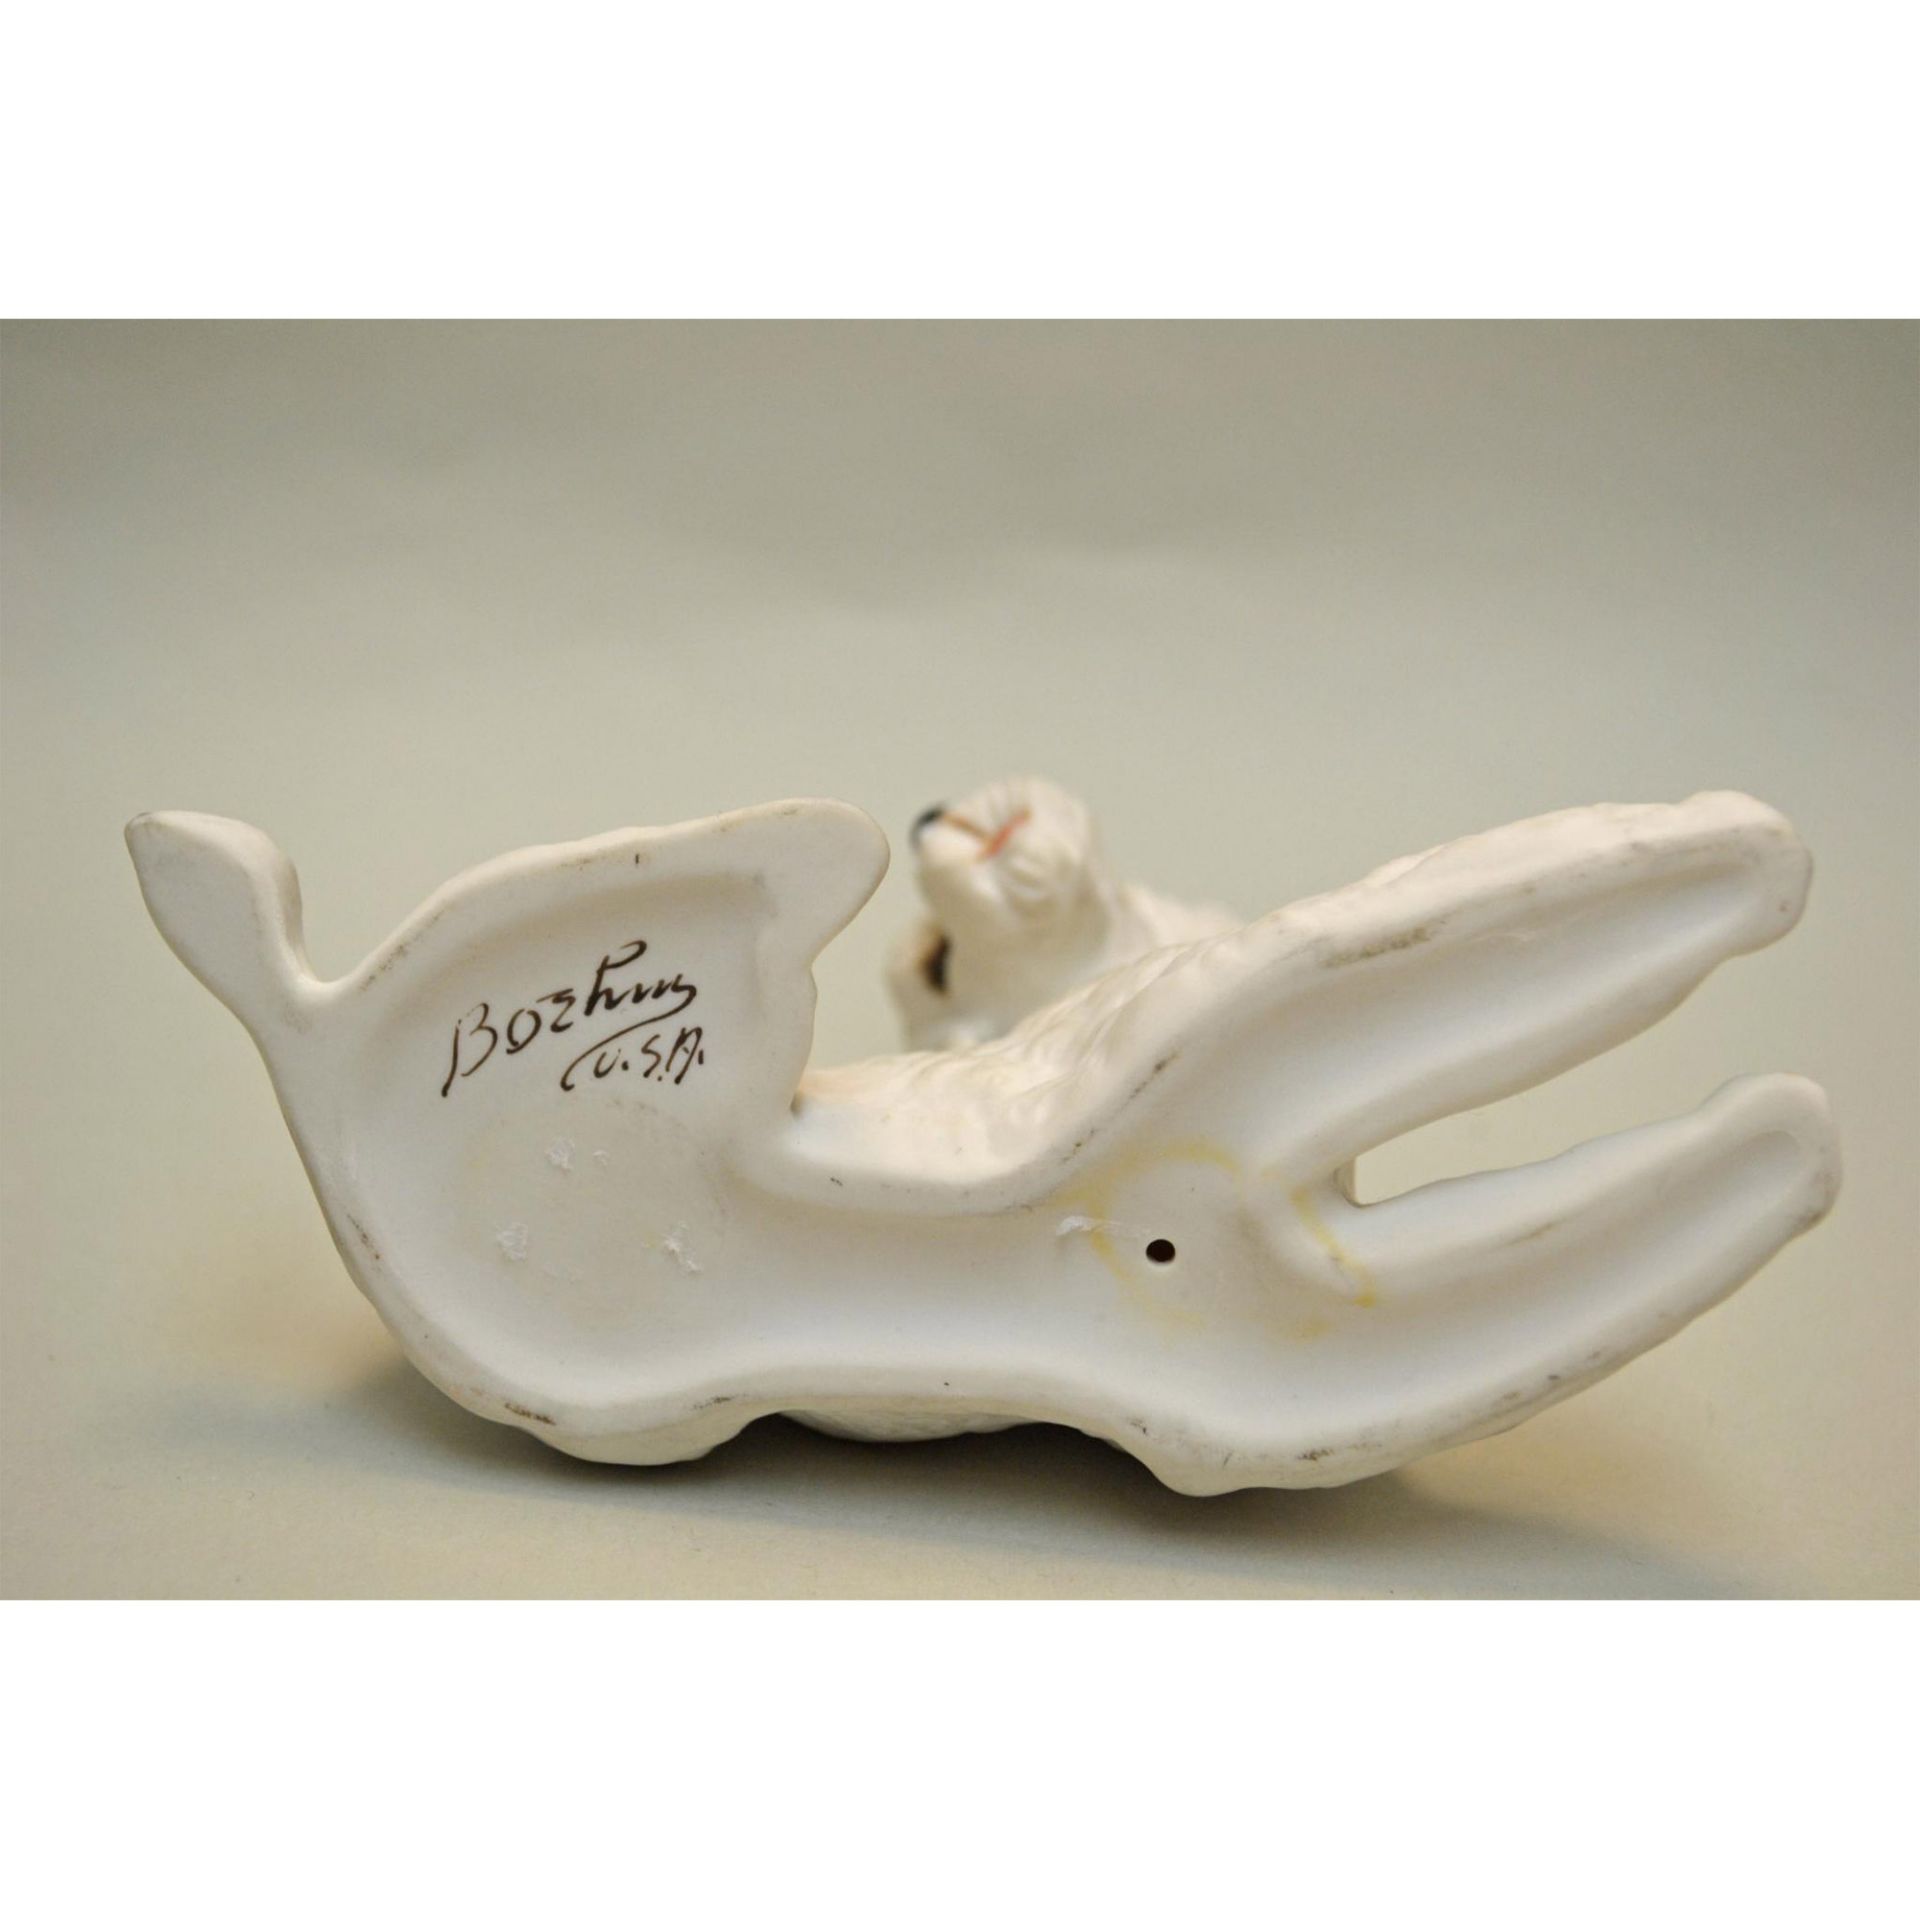 Boehm Porcelain Poodle Reclining Dog Figurines, 1959, Collection Of Two (2) - Image 8 of 8